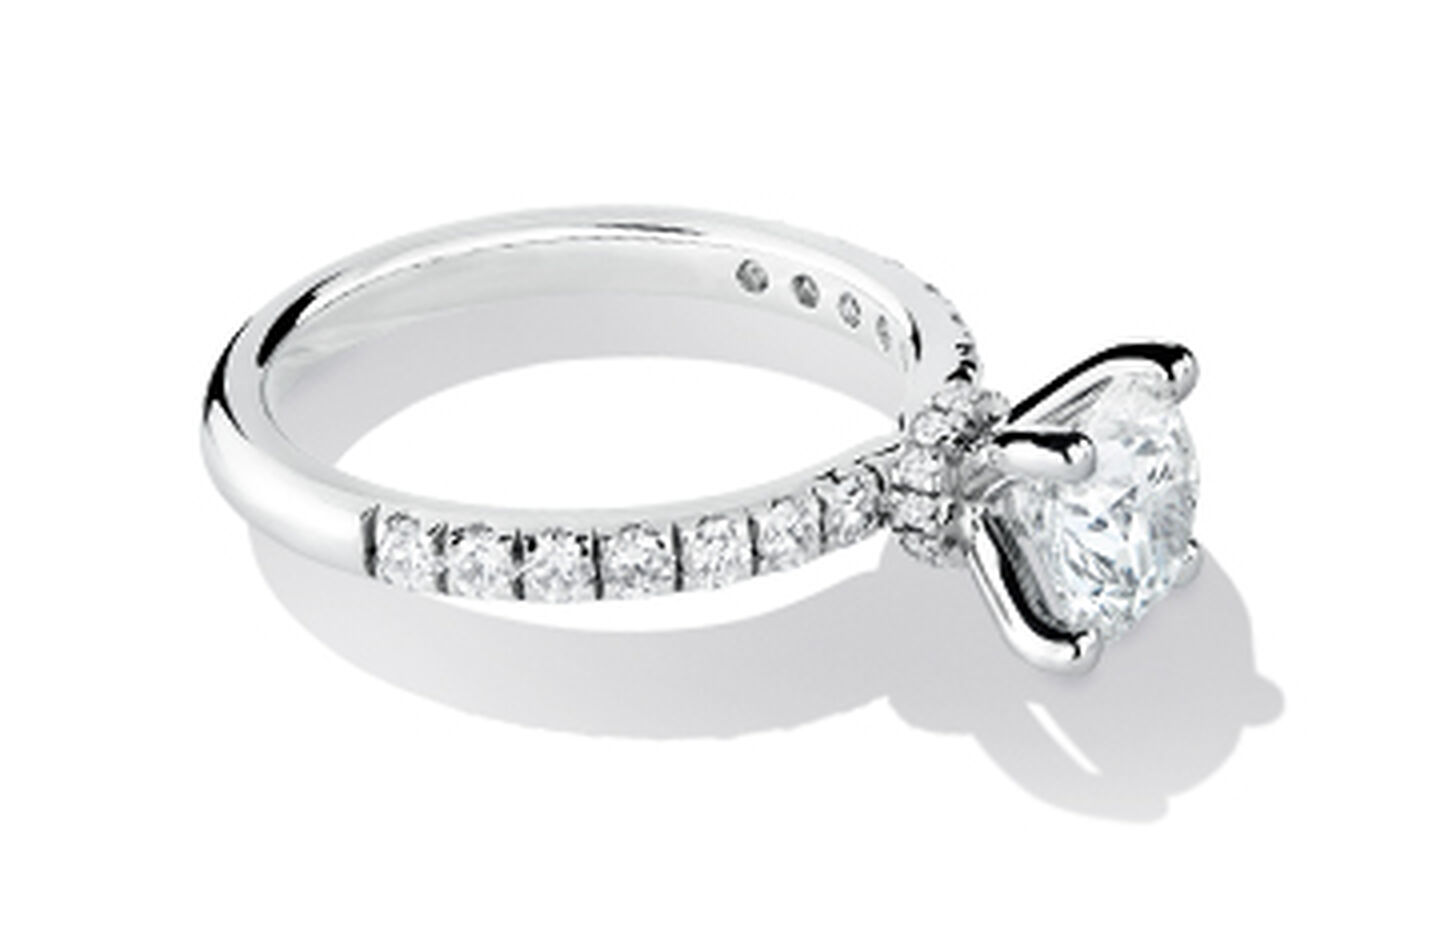 White gold and diamond ring with diamond insets in the band